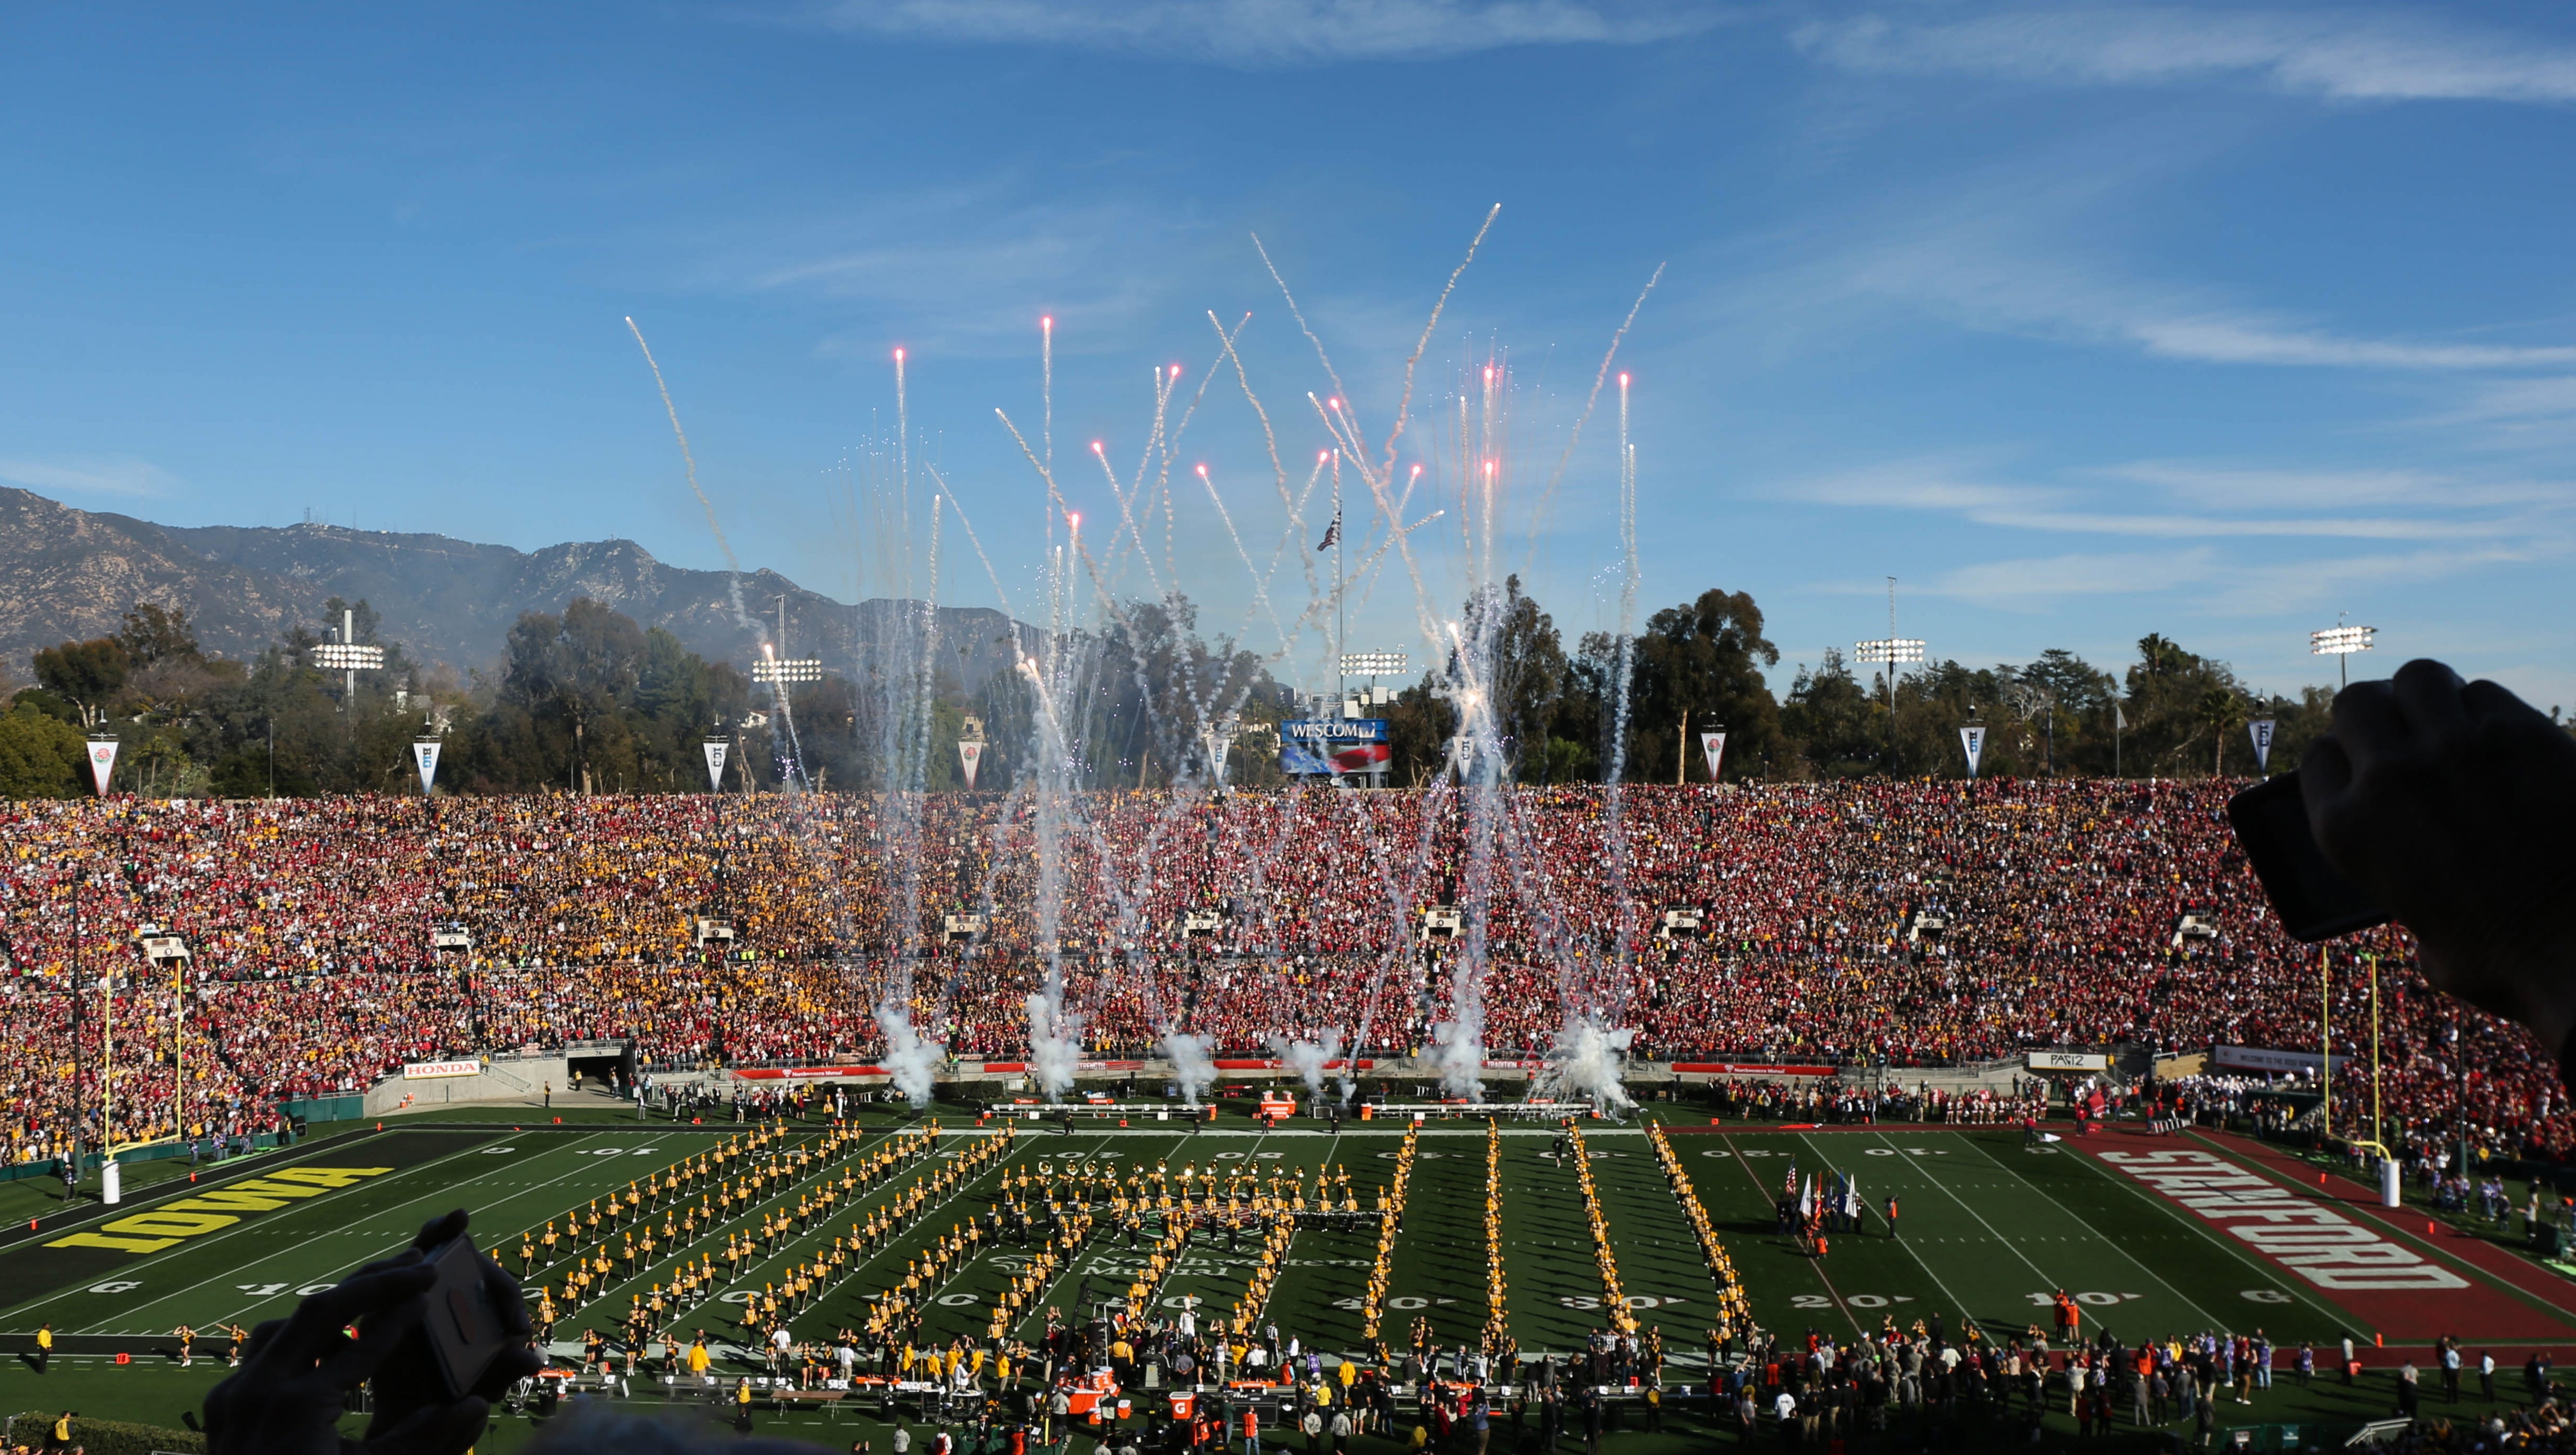 Iowa and Stanford fans fill the stadium on Friday, Jan. 1, 2016, as fireworks are shot off at the Rose Bowl in Pasadena, Calif.